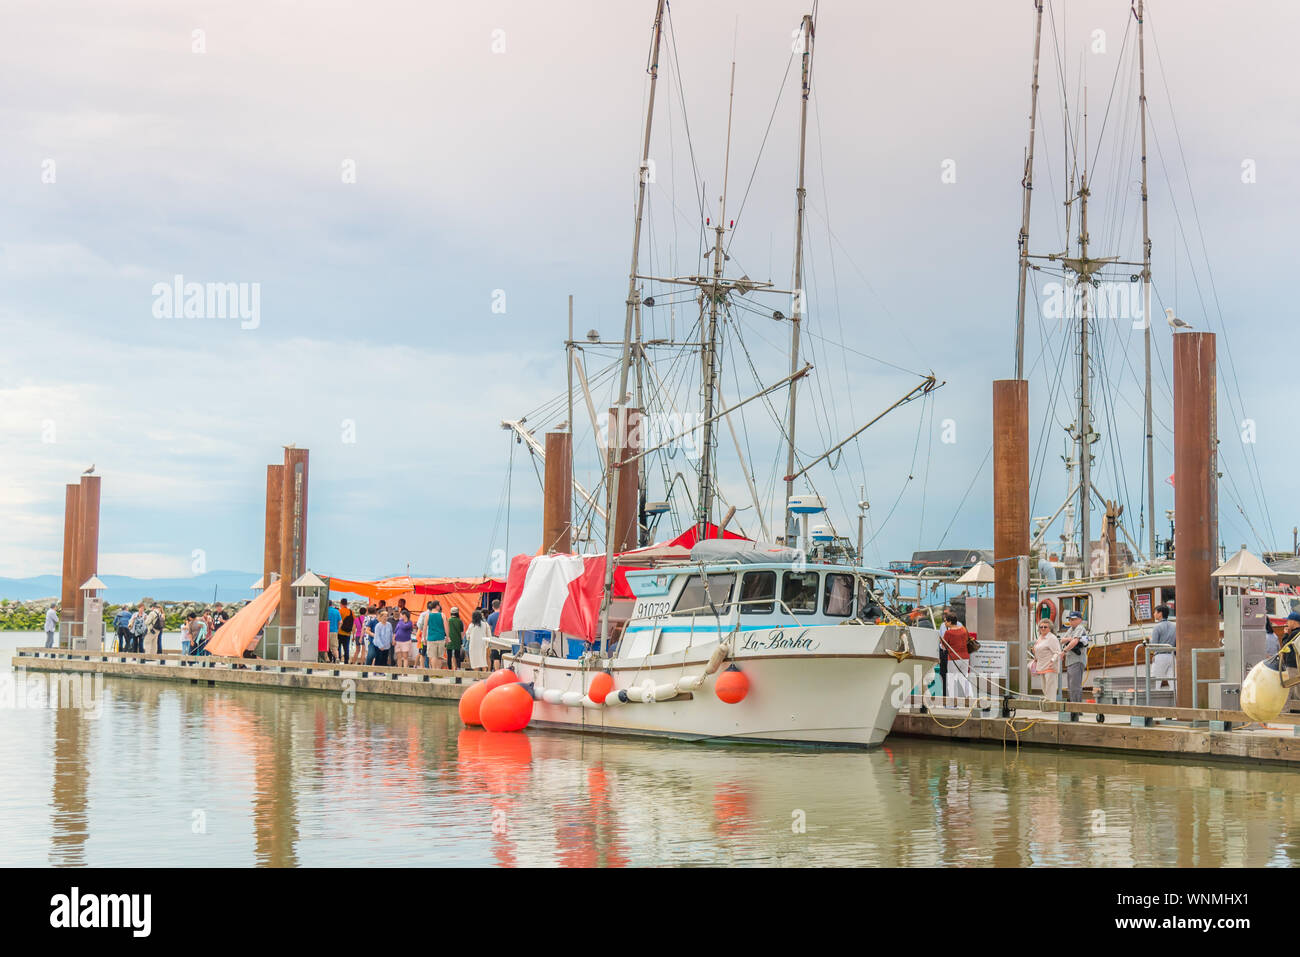 Steveston, British Columbia/Canada - June 24, 2018: people shopping for freshly caught seafood from boats docked at Fisherman's Wharf Stock Photo